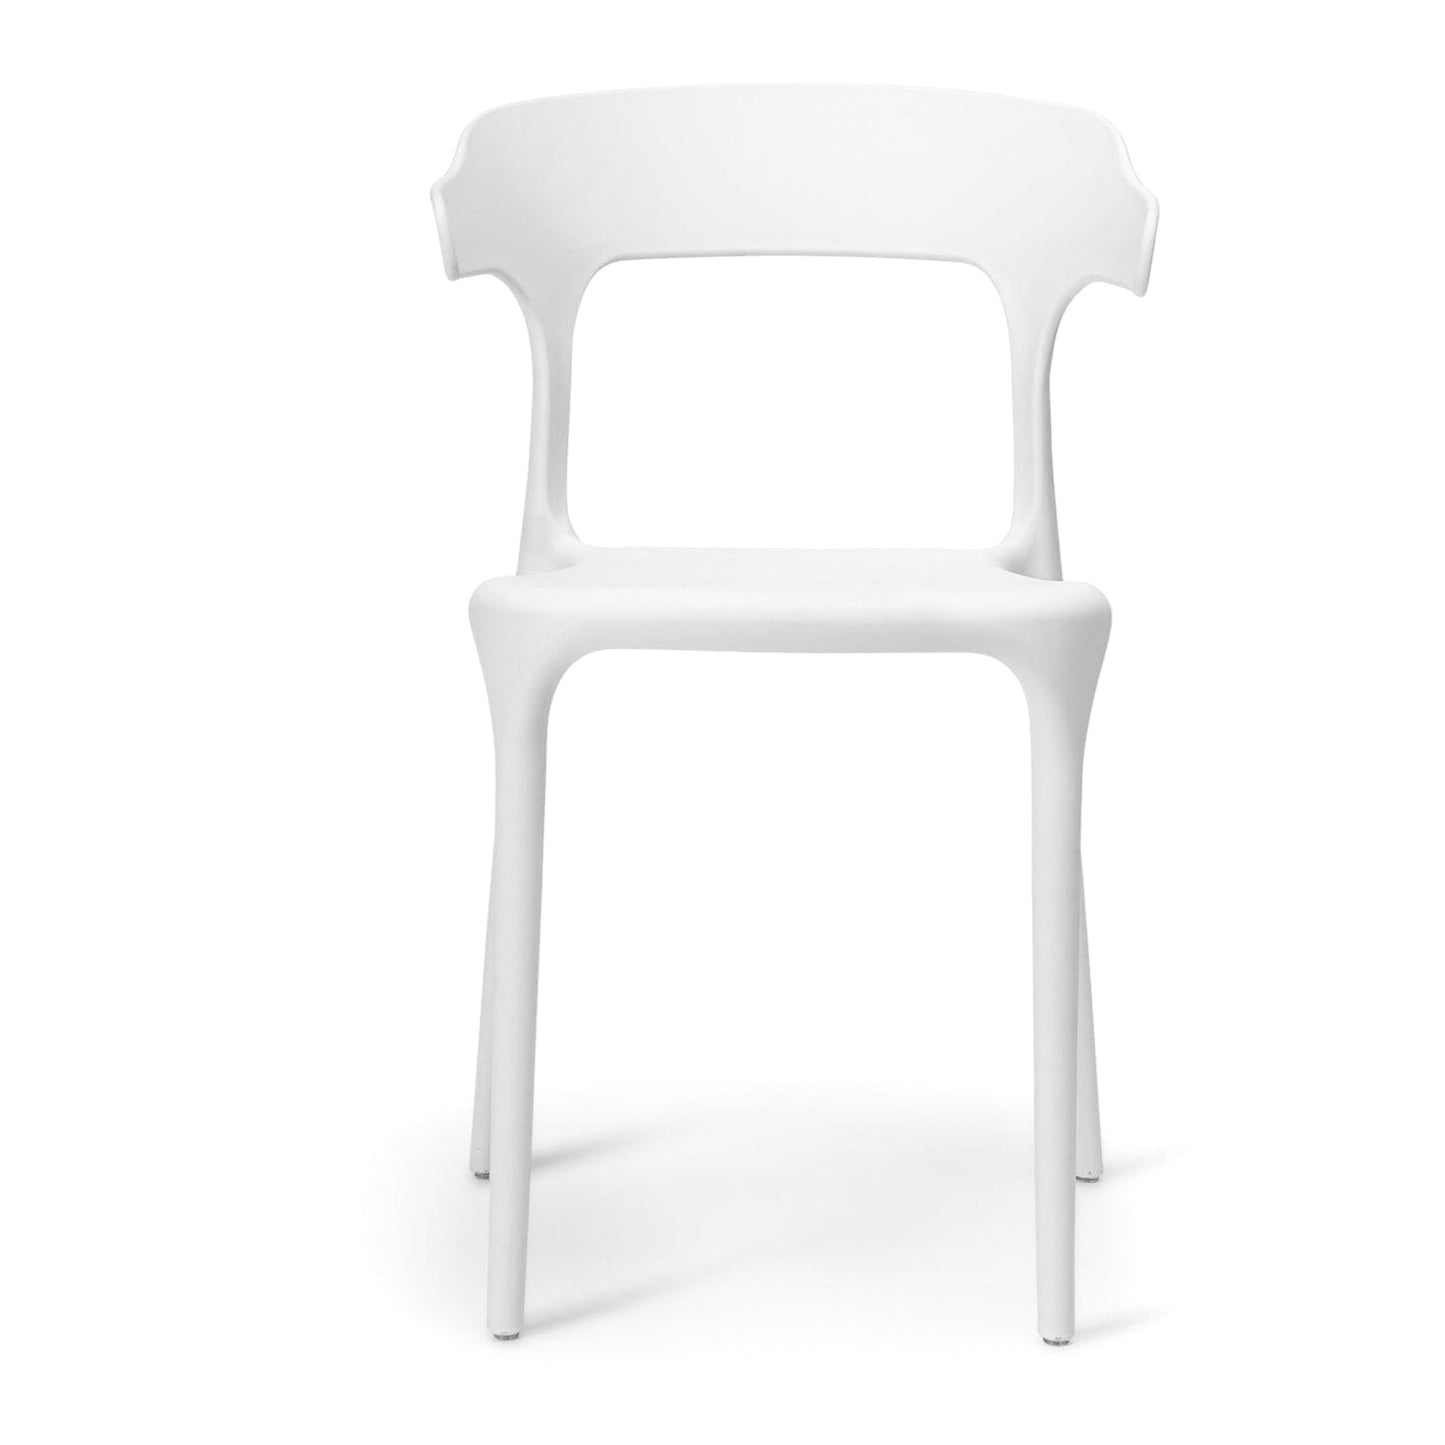 Finn dining chairs - set of 4 - white - Laura James